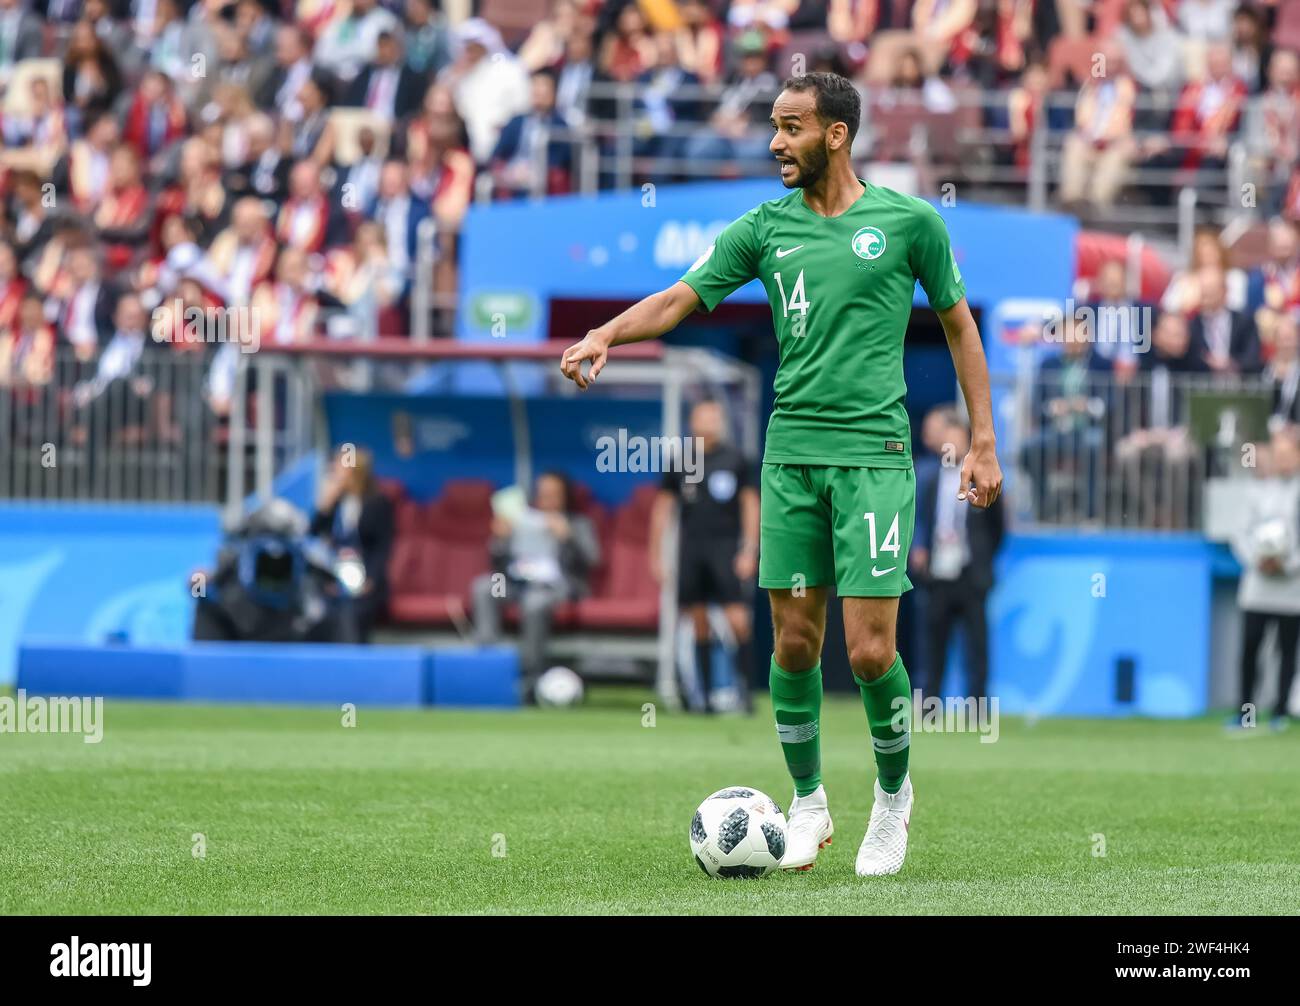 Moscow, Russia – June 14, 2018. Saudi Arabia national football team midfielder Abdullah Otayf during opening match of FIFA World Cup 2018 Russia vs Sa Stock Photo